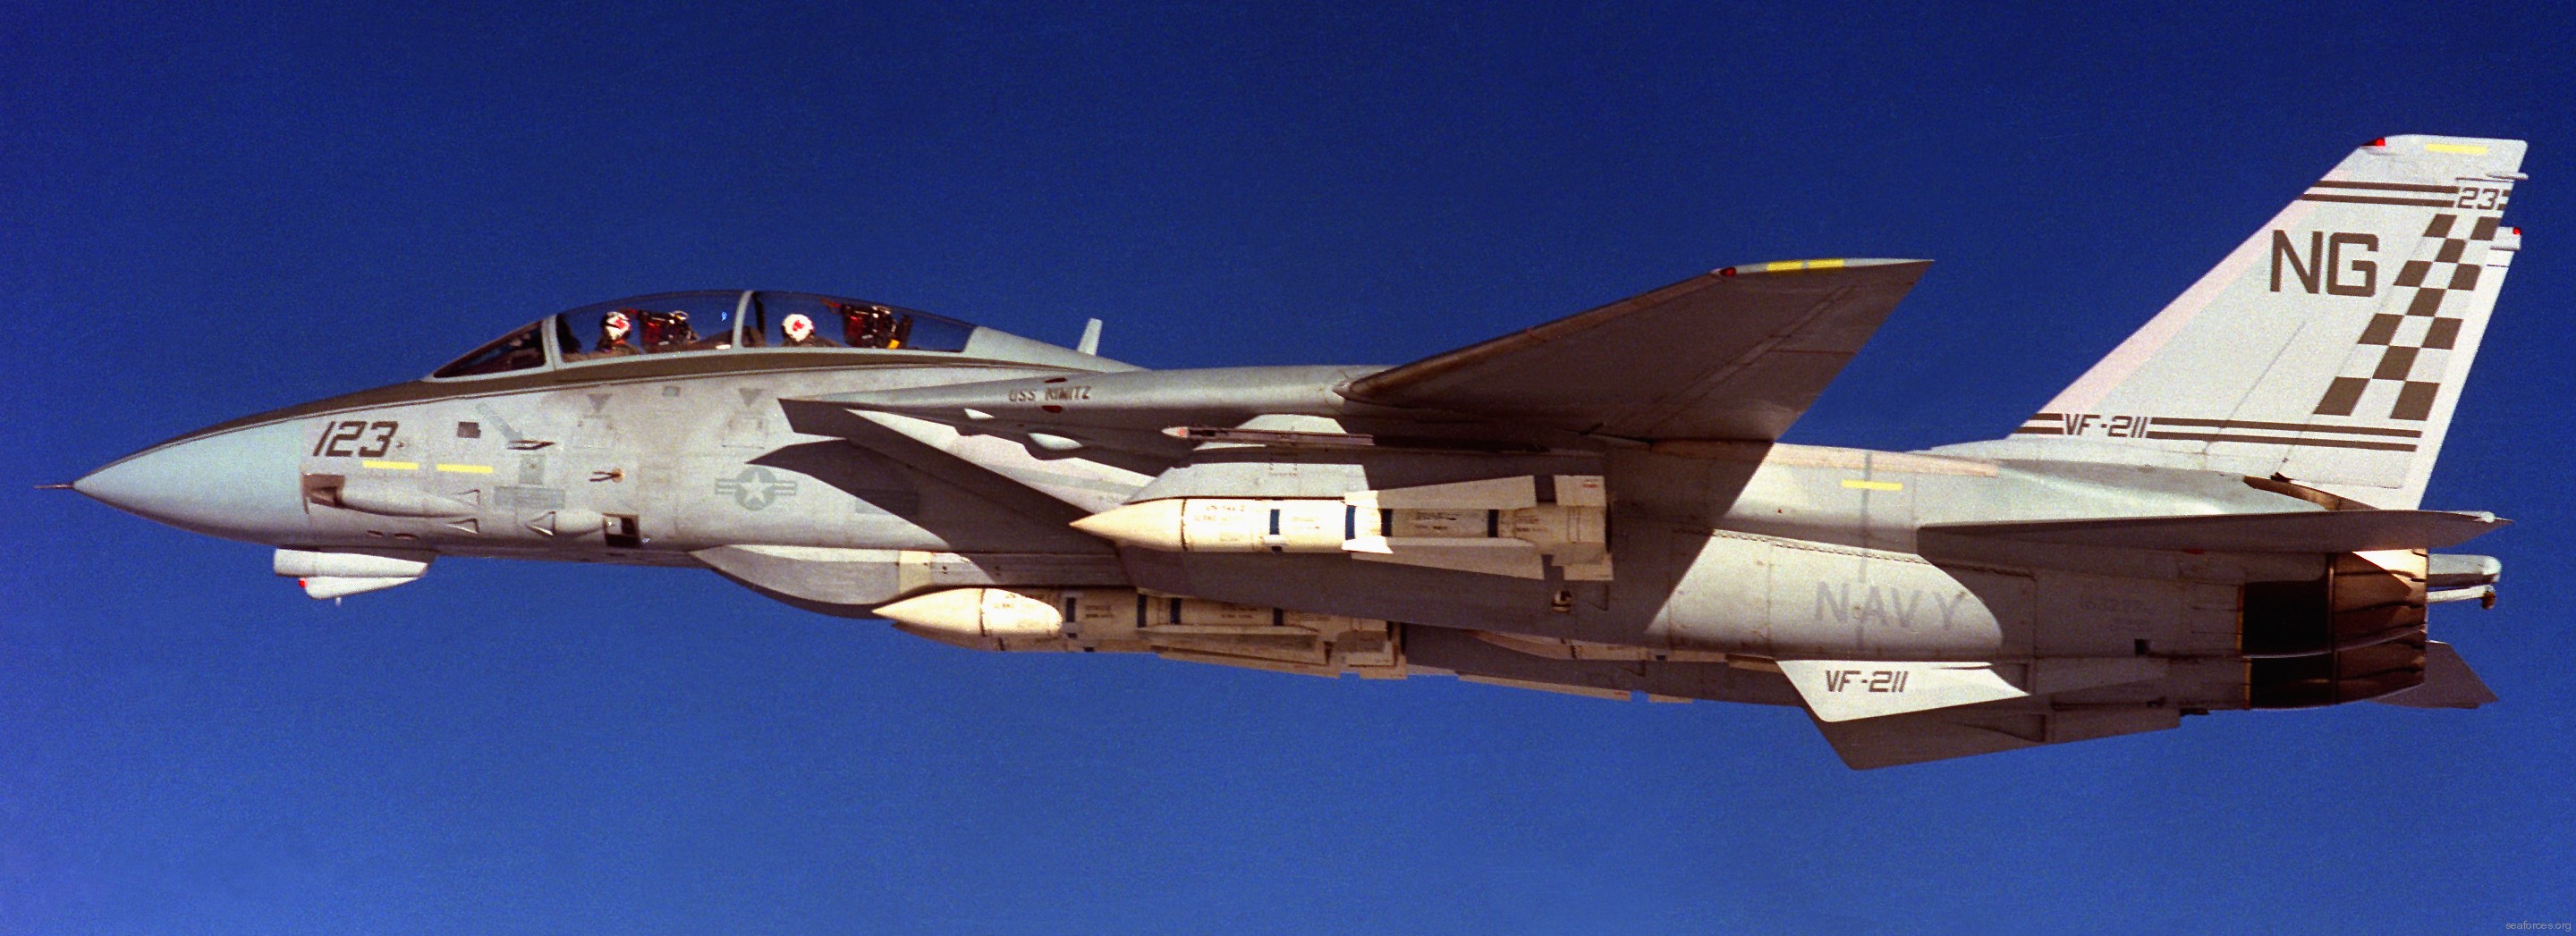 vf-211 fighting checkmates fighter squadron f-14a tomcat us navy carrier air wing cvw-9 37 aim-54 phoenix missile